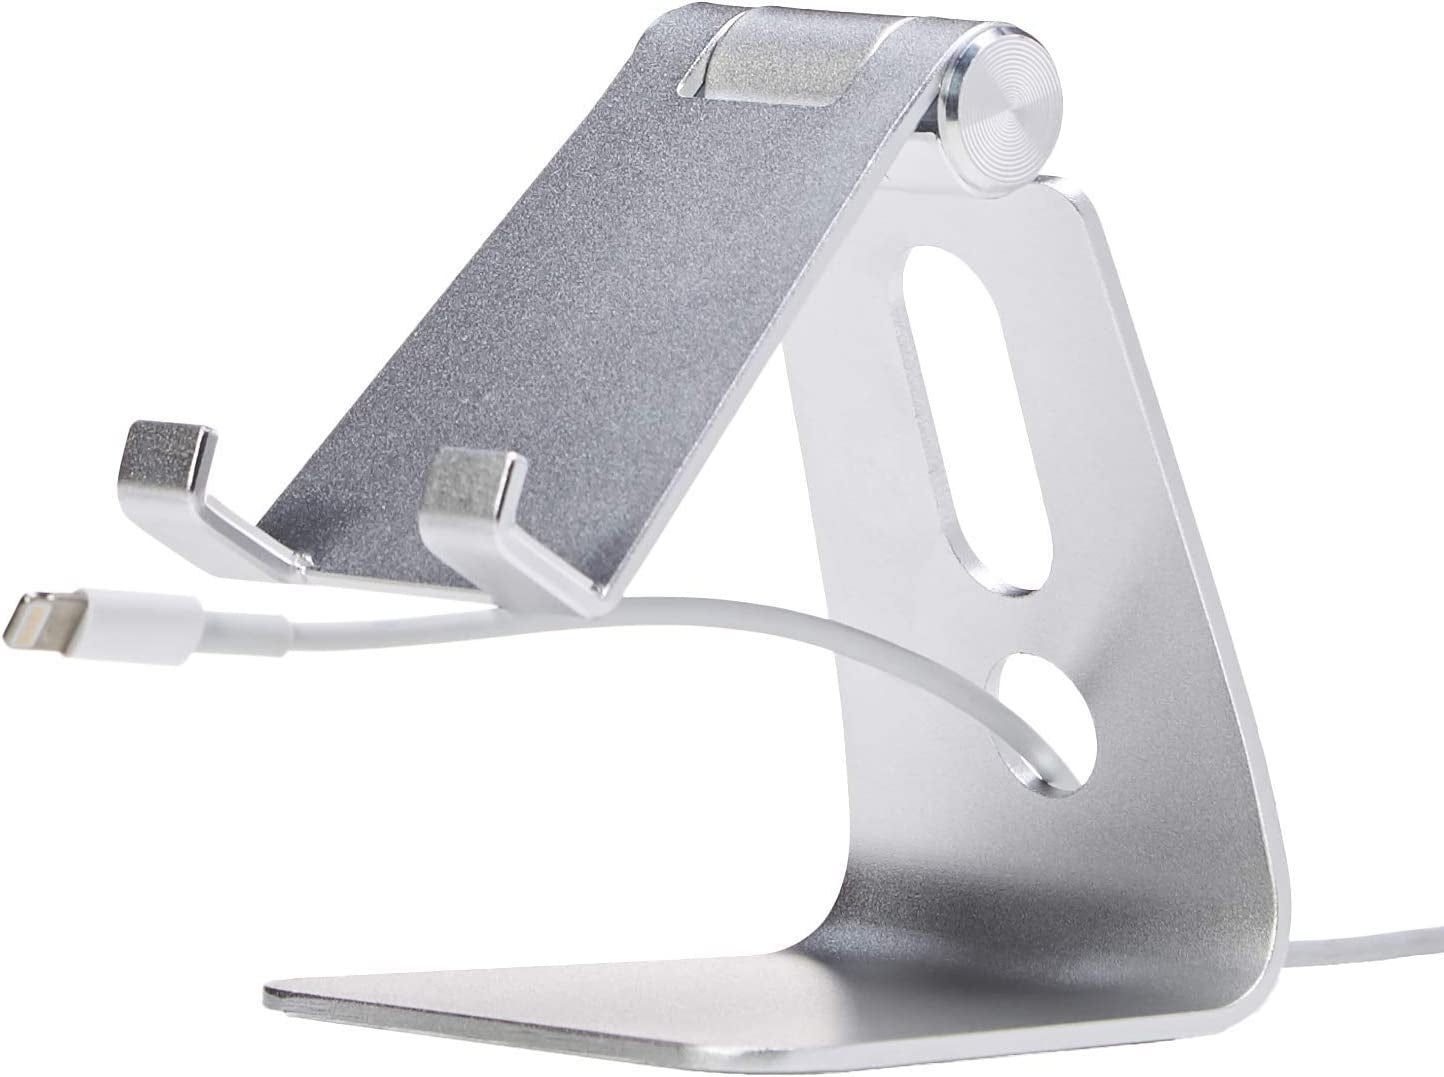 Adjustable Aluminum Cell Phone Desk Stand for Iphone and Android, Silver